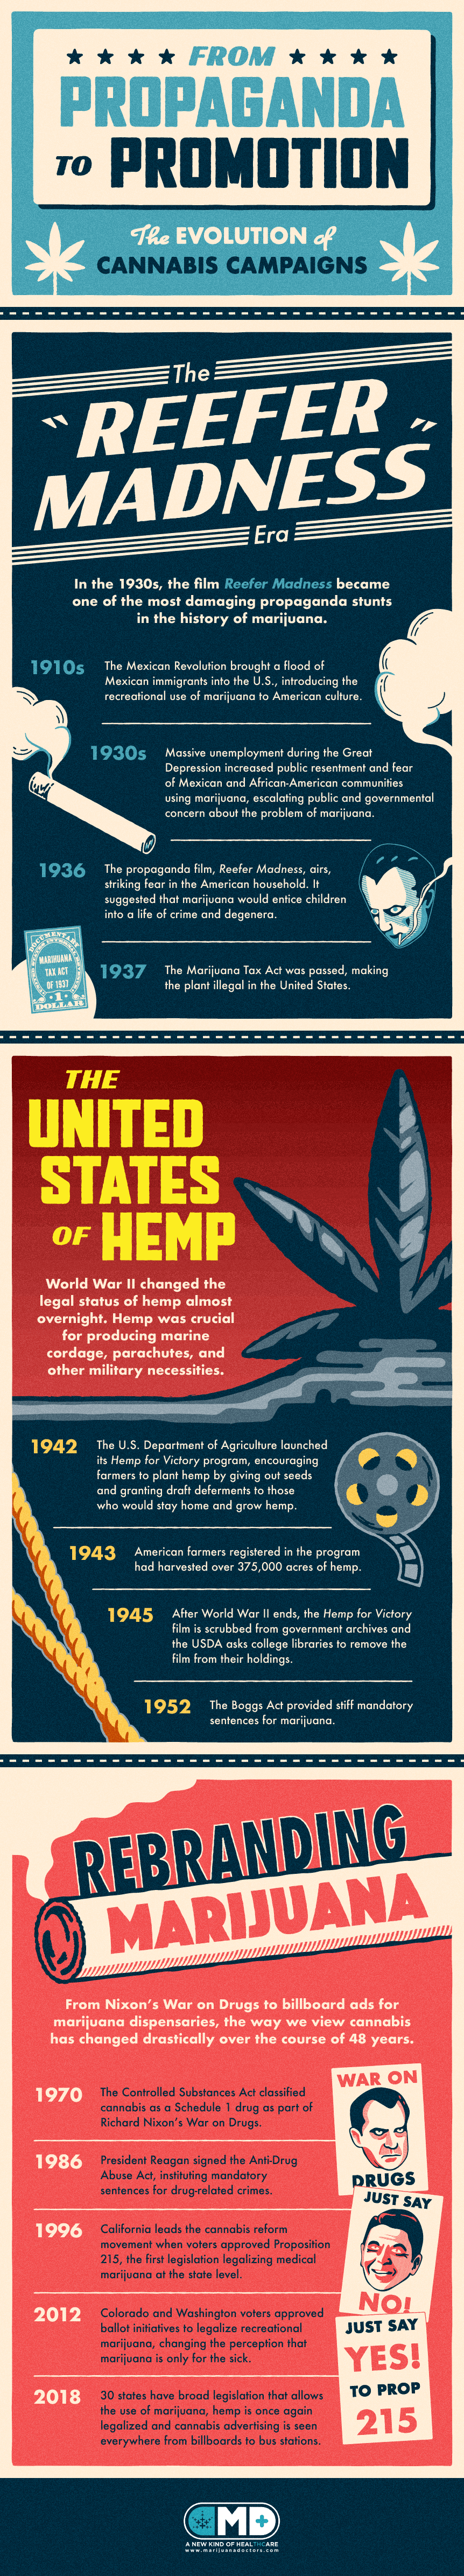 A Century of 'Reefer Madness': Evolution of Cannabis Campaigns - Infographic